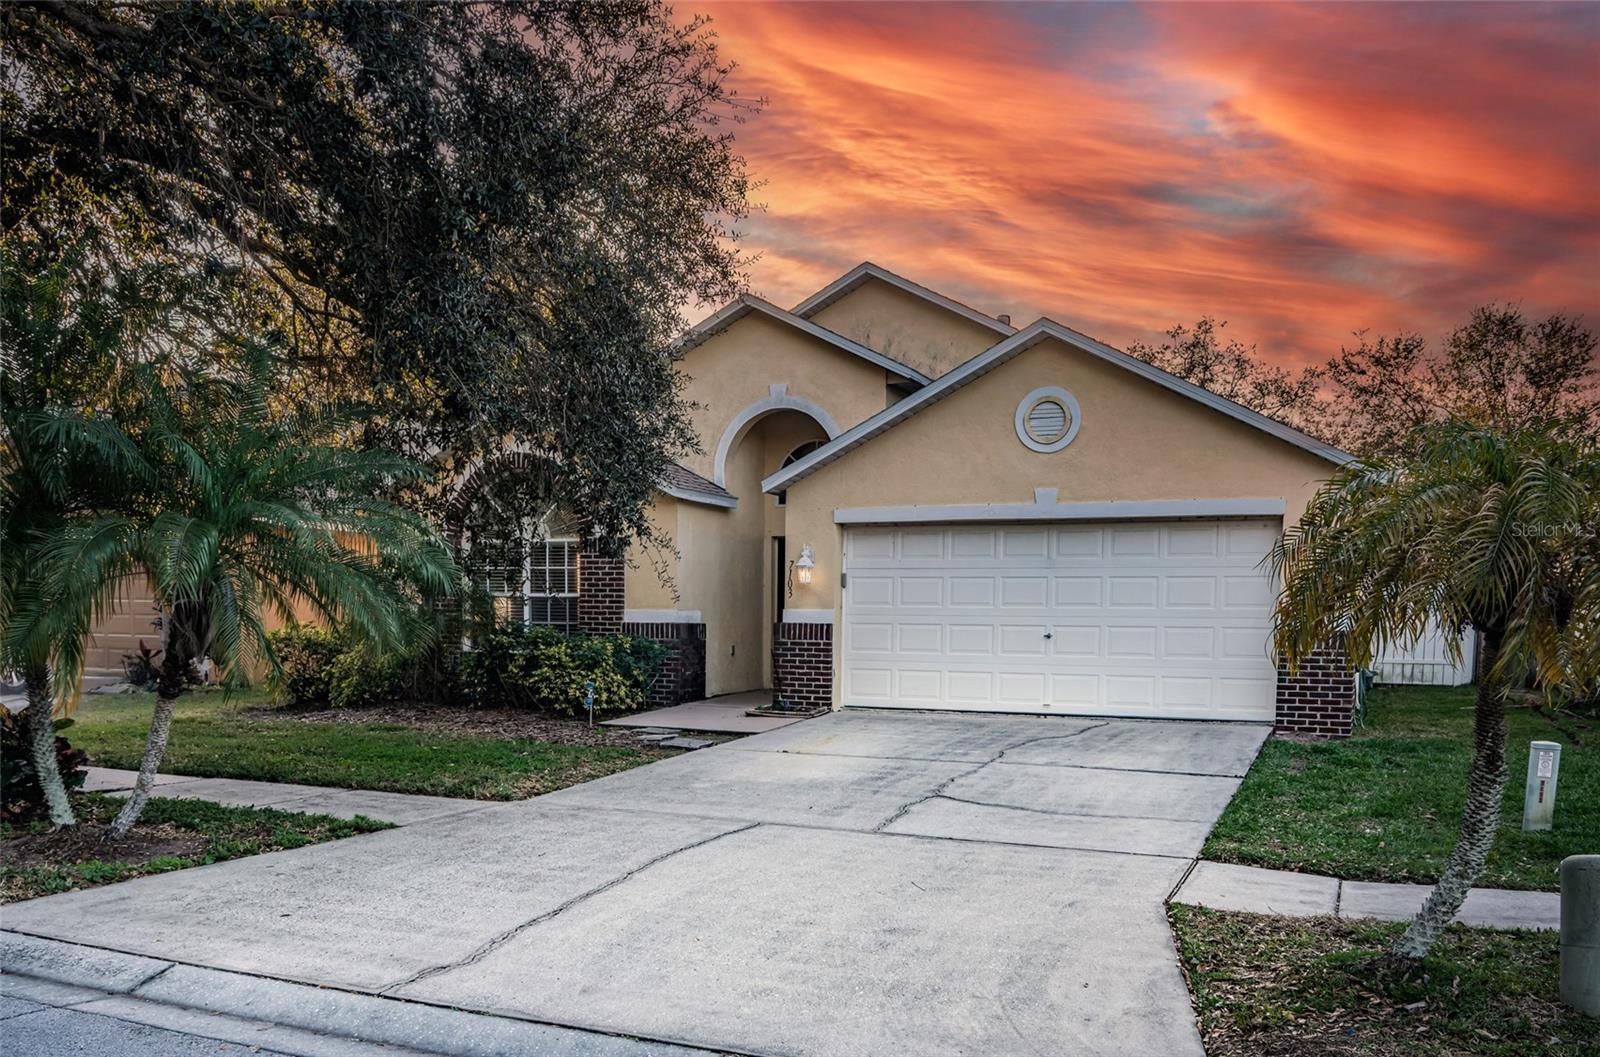 Photo one of 7103 Colony Pointe Dr Riverview FL 33578 | MLS T3503406